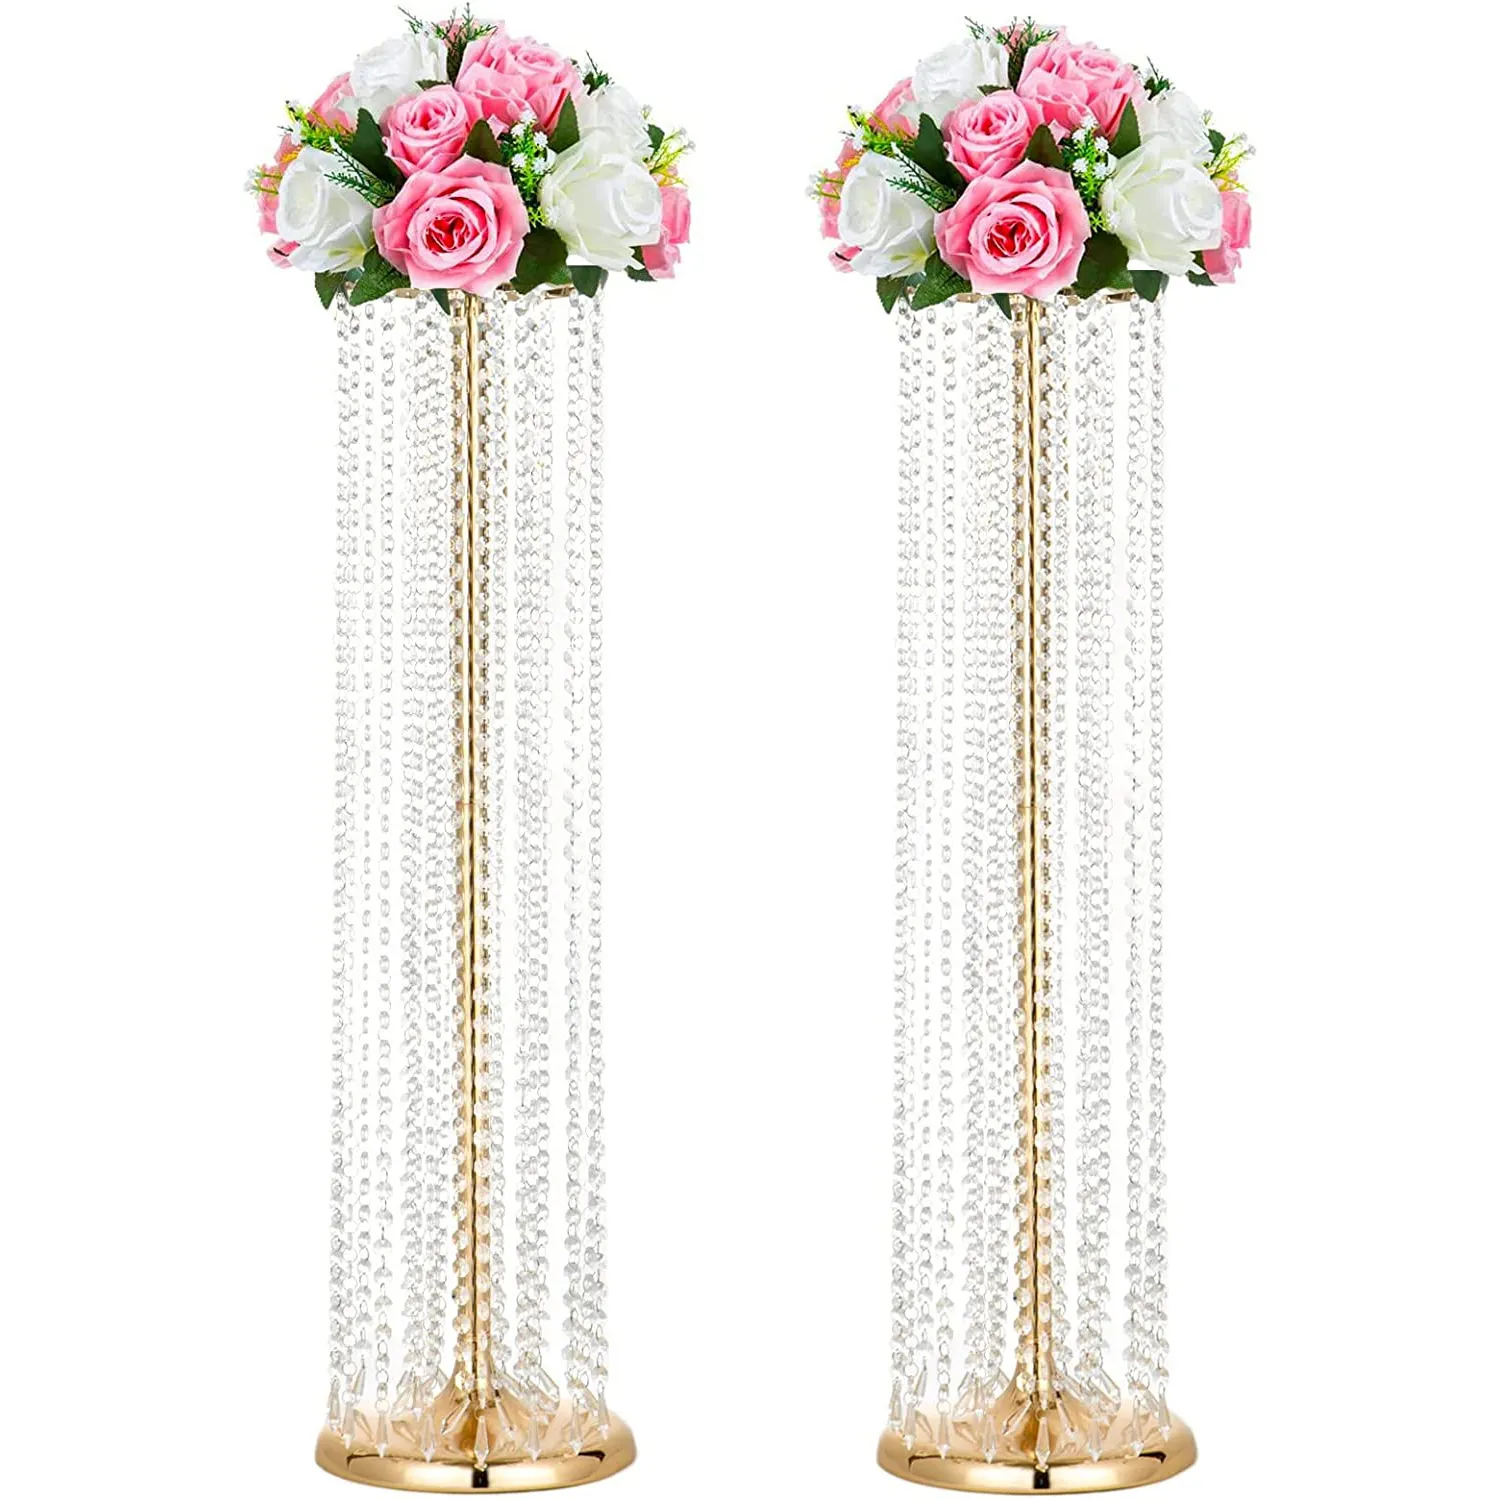 35.43in Tall Metal Wedding Centerpieces with Chandelier Acrylic Crystals Flower Stand Leads Road Stands for Wedding Party